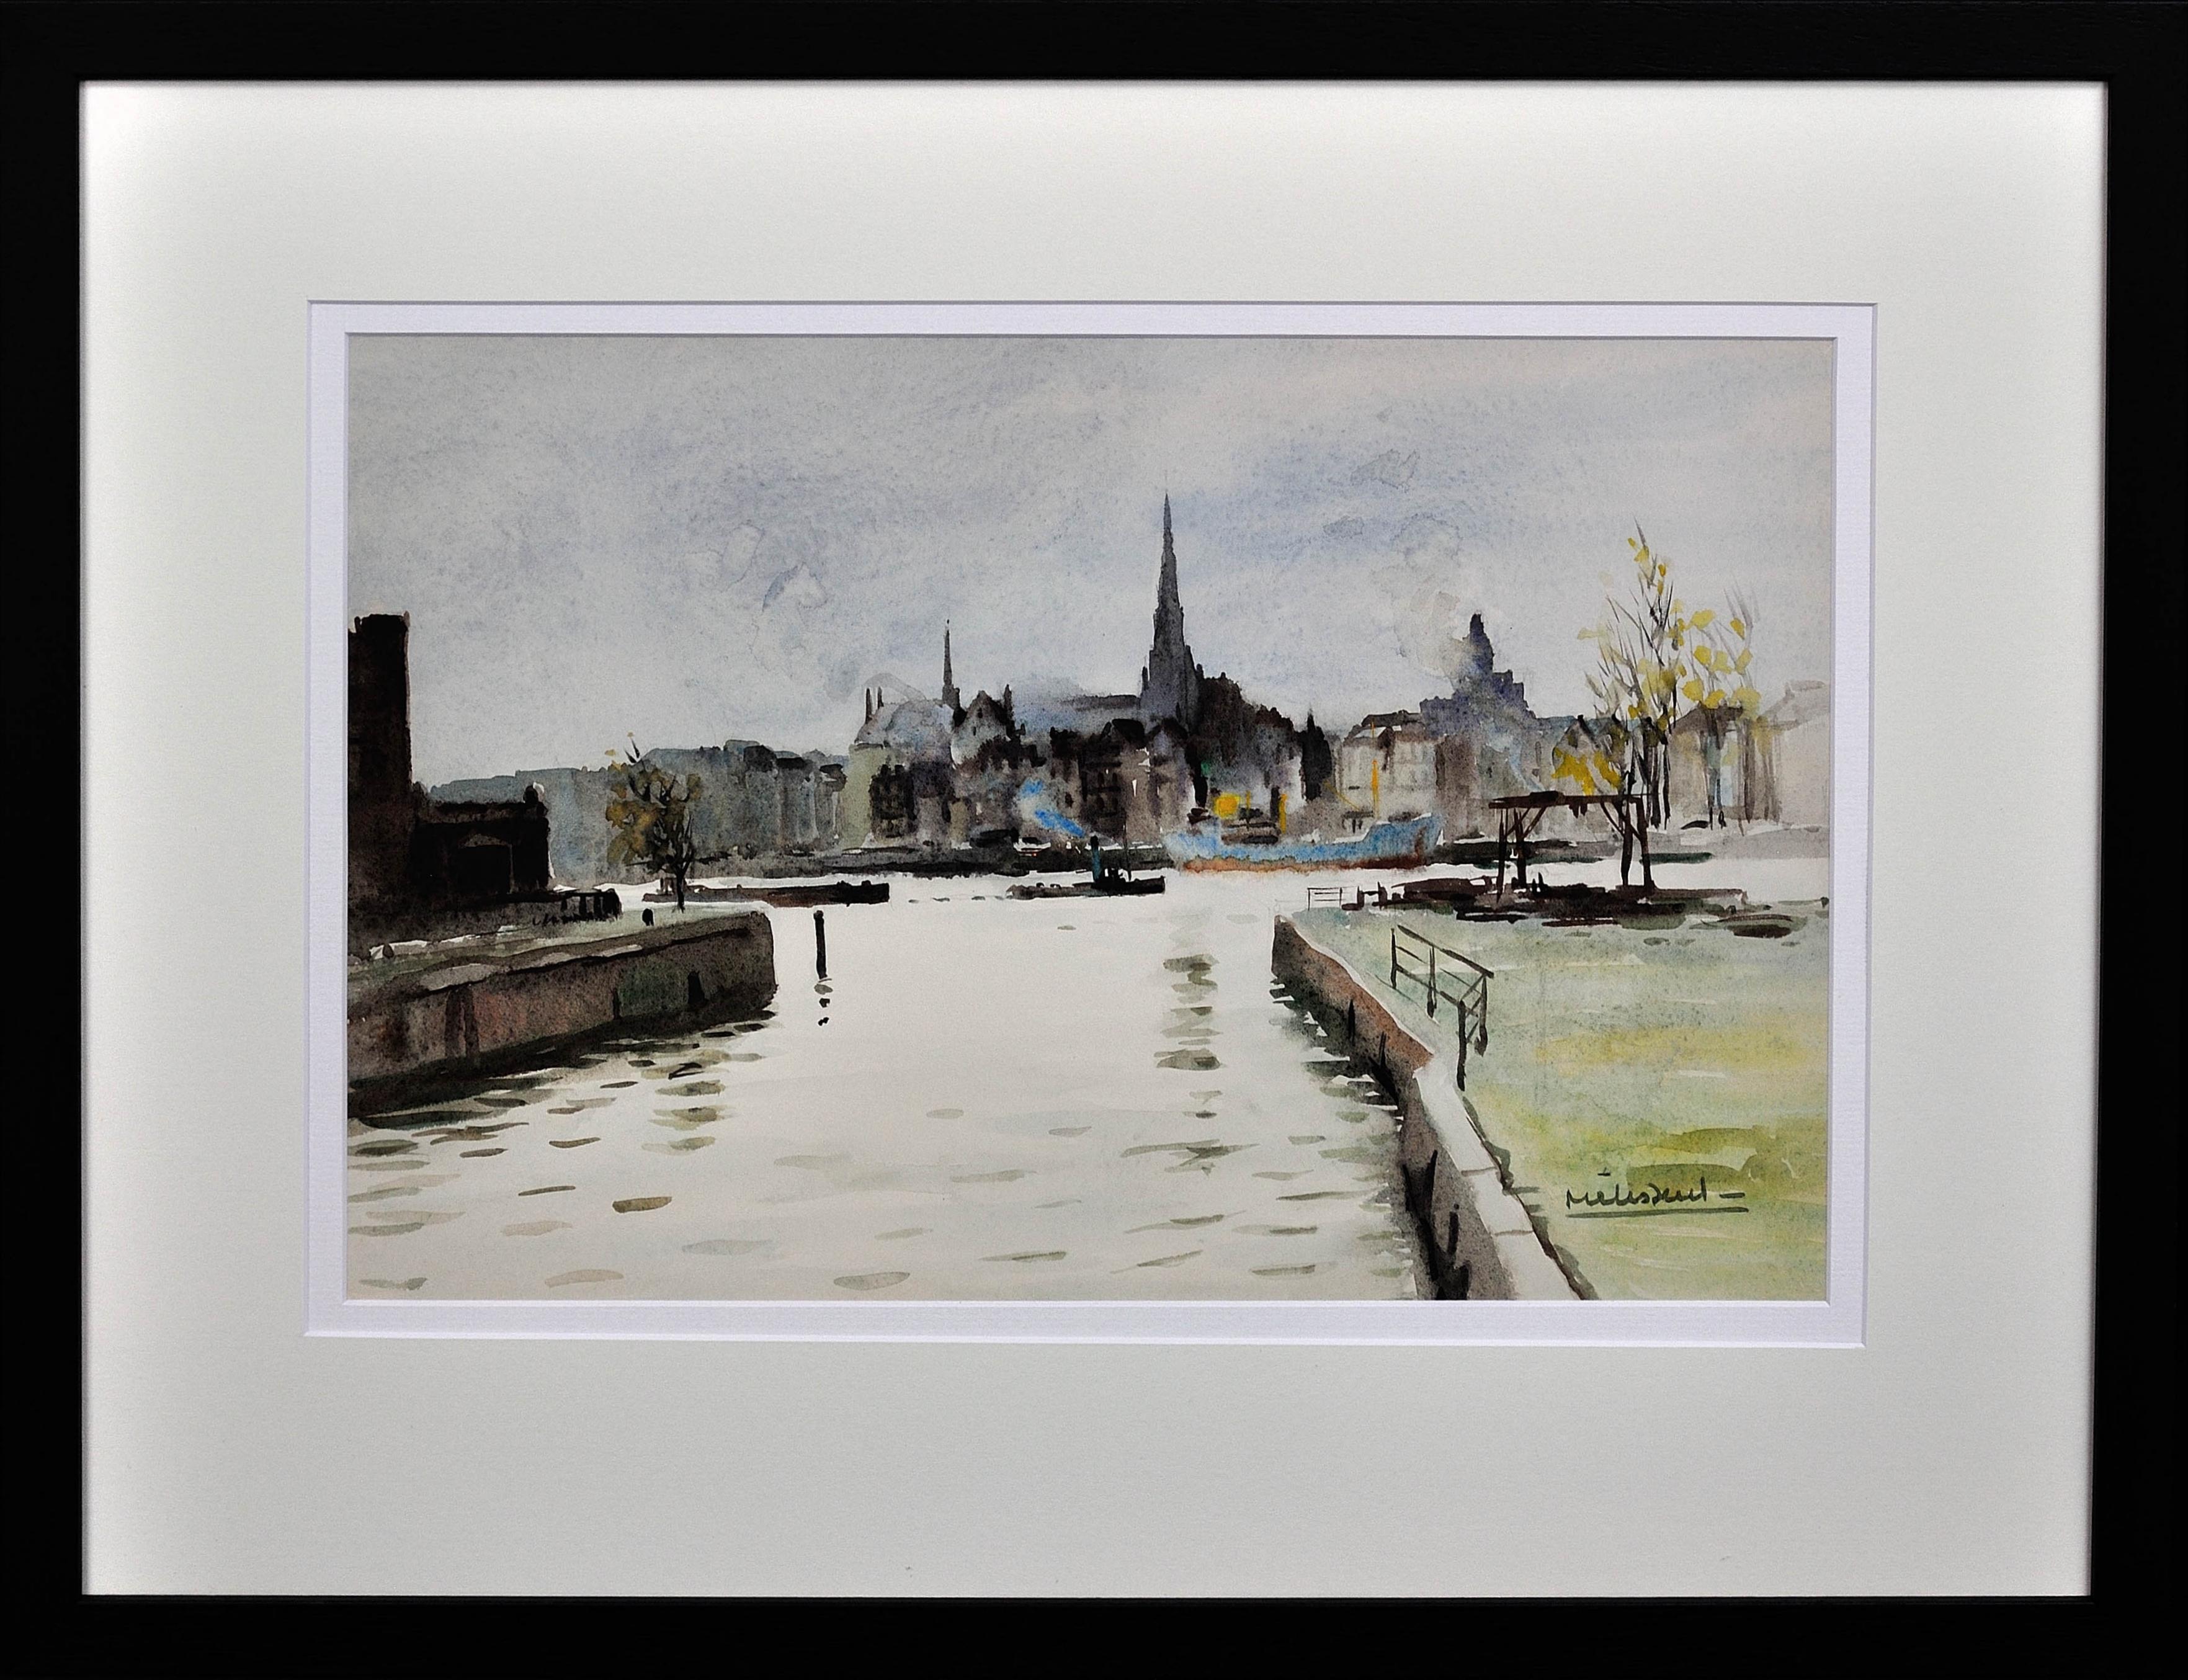 Maurice Raoul Melissent Landscape Art - The Maritime District, Rotterdam. 1950s. Docklands. Canals. Churches. Watercolor